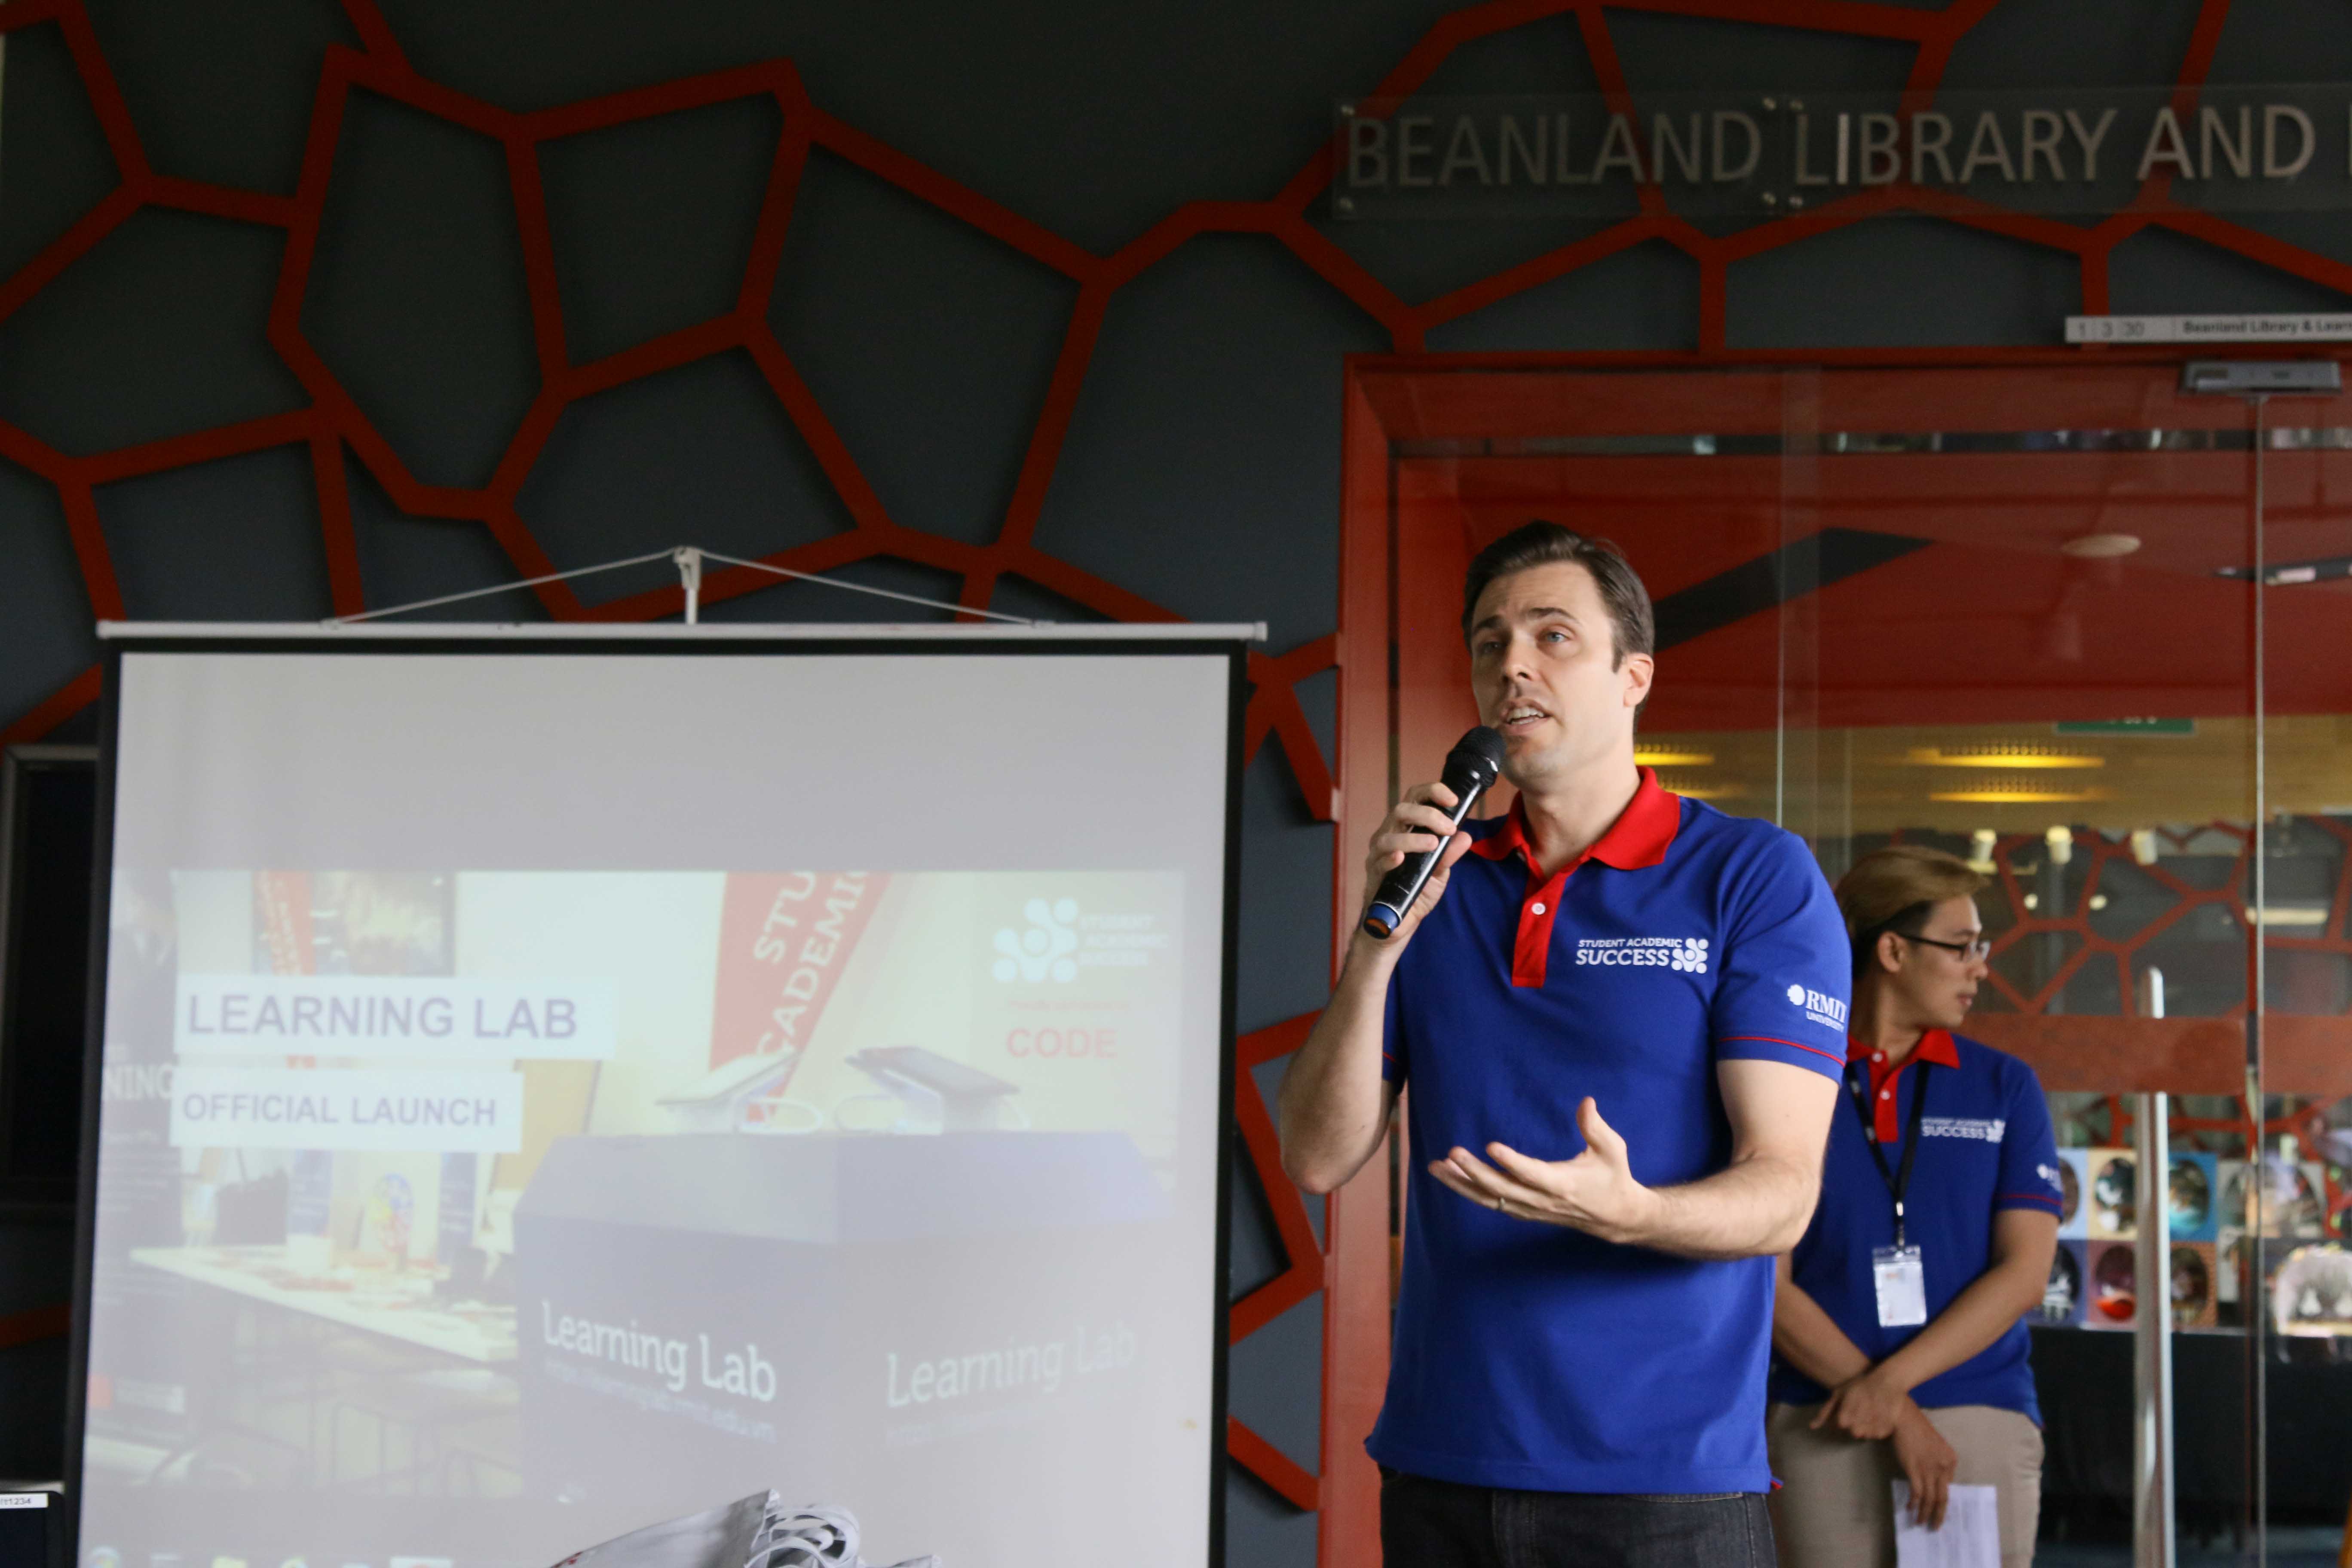 Joel Swenddal, Manager of Student Academic Success (SAS), presented about the Learning Lab Vietnam at the launch on 6 July.